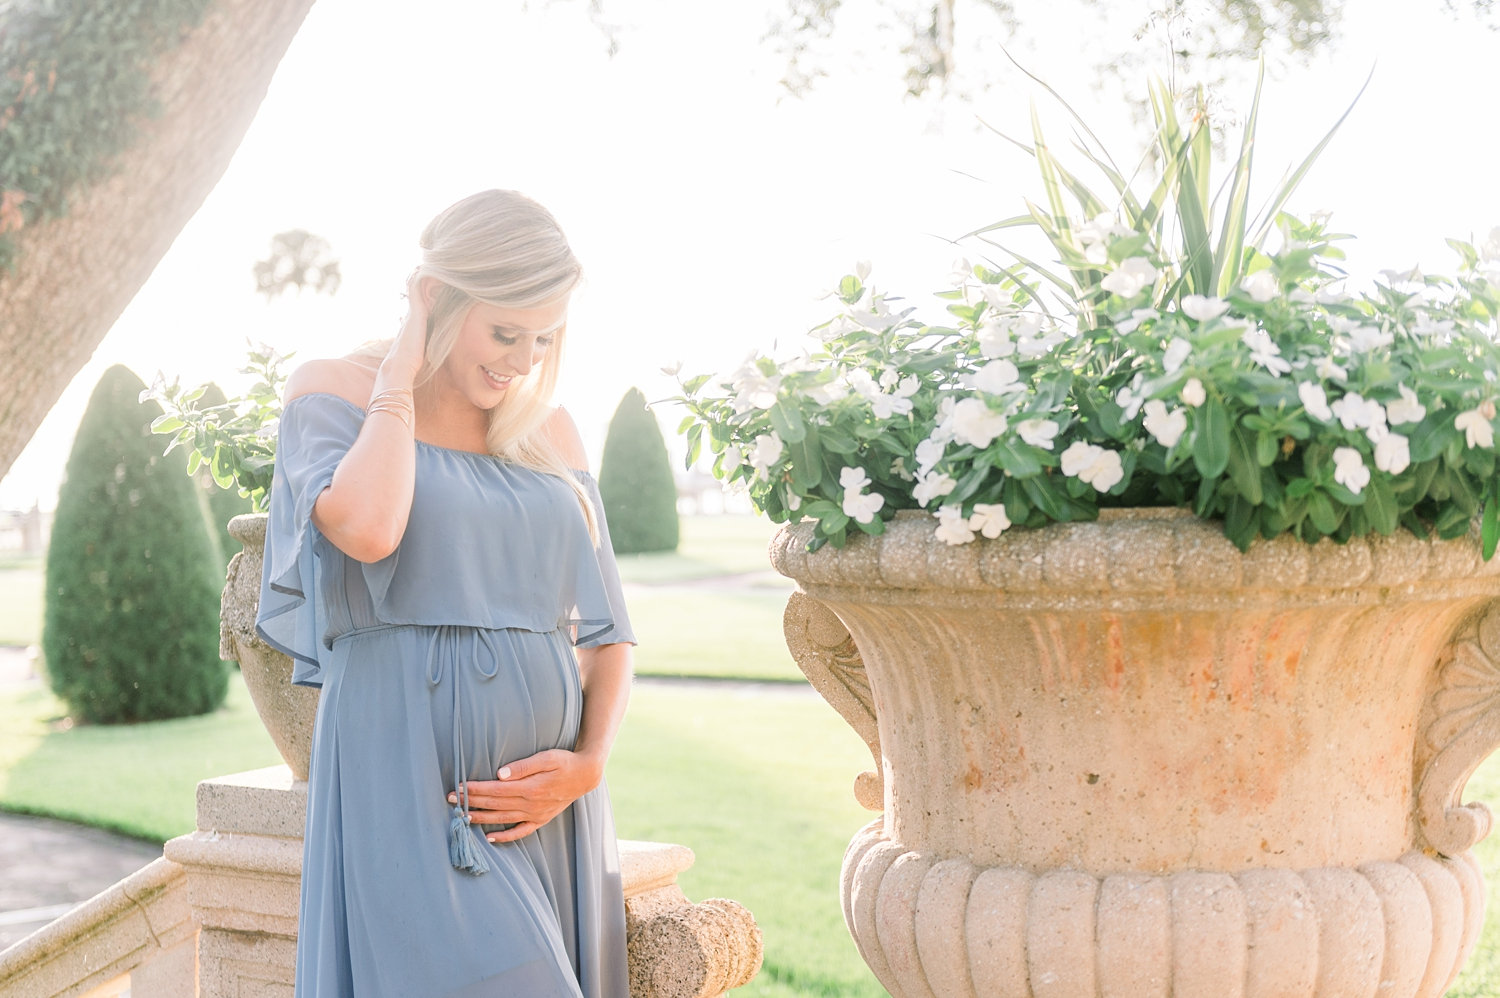 mom to be smiling down at her baby bump, she is tucking her long blonde hair behind her ear with one hand and holding her pregnant belly with the other, sunset maternity photo